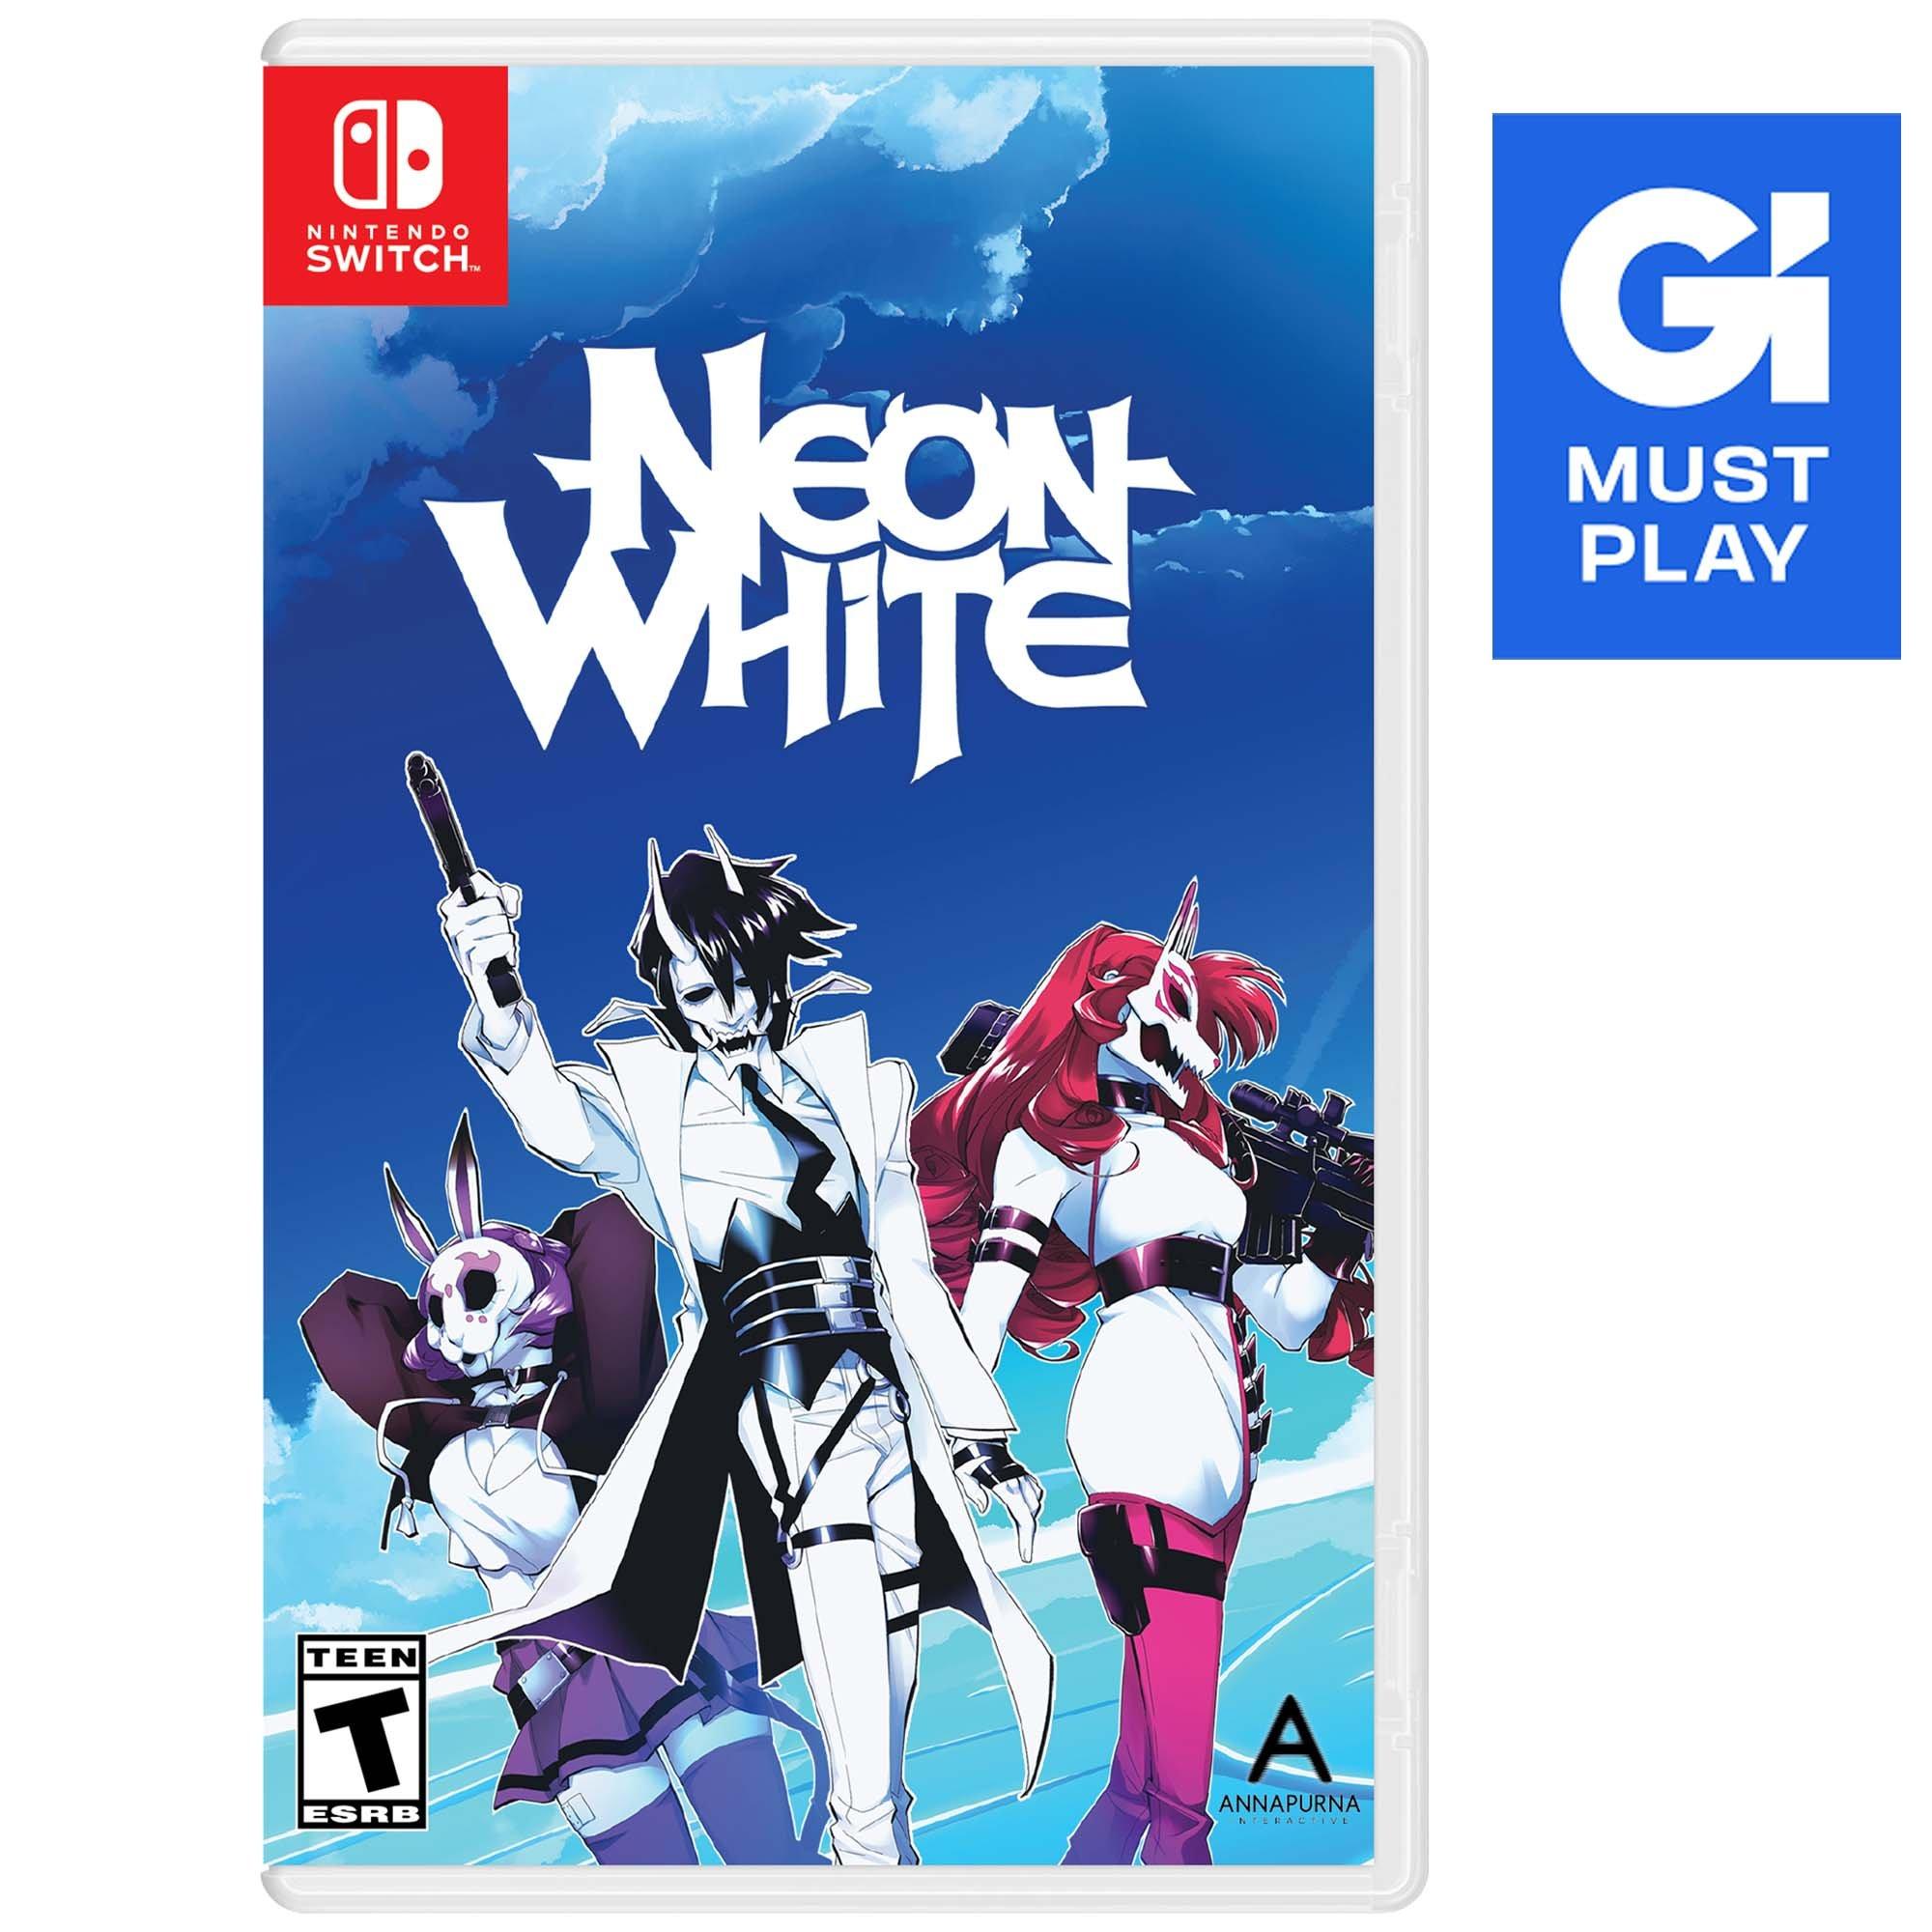 Every Character Design In Neon White, Ranked